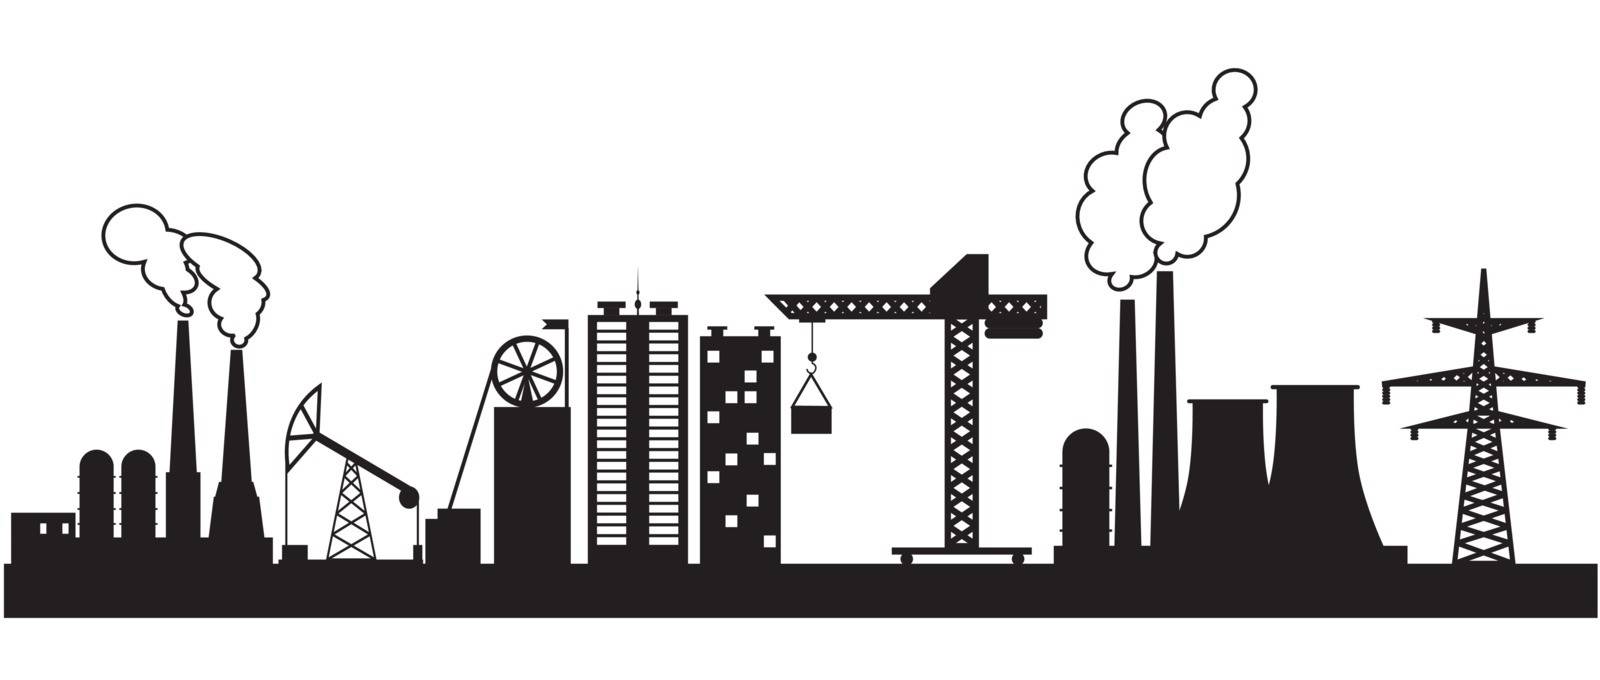 Eight urban and industrial buildings. Vector illustration